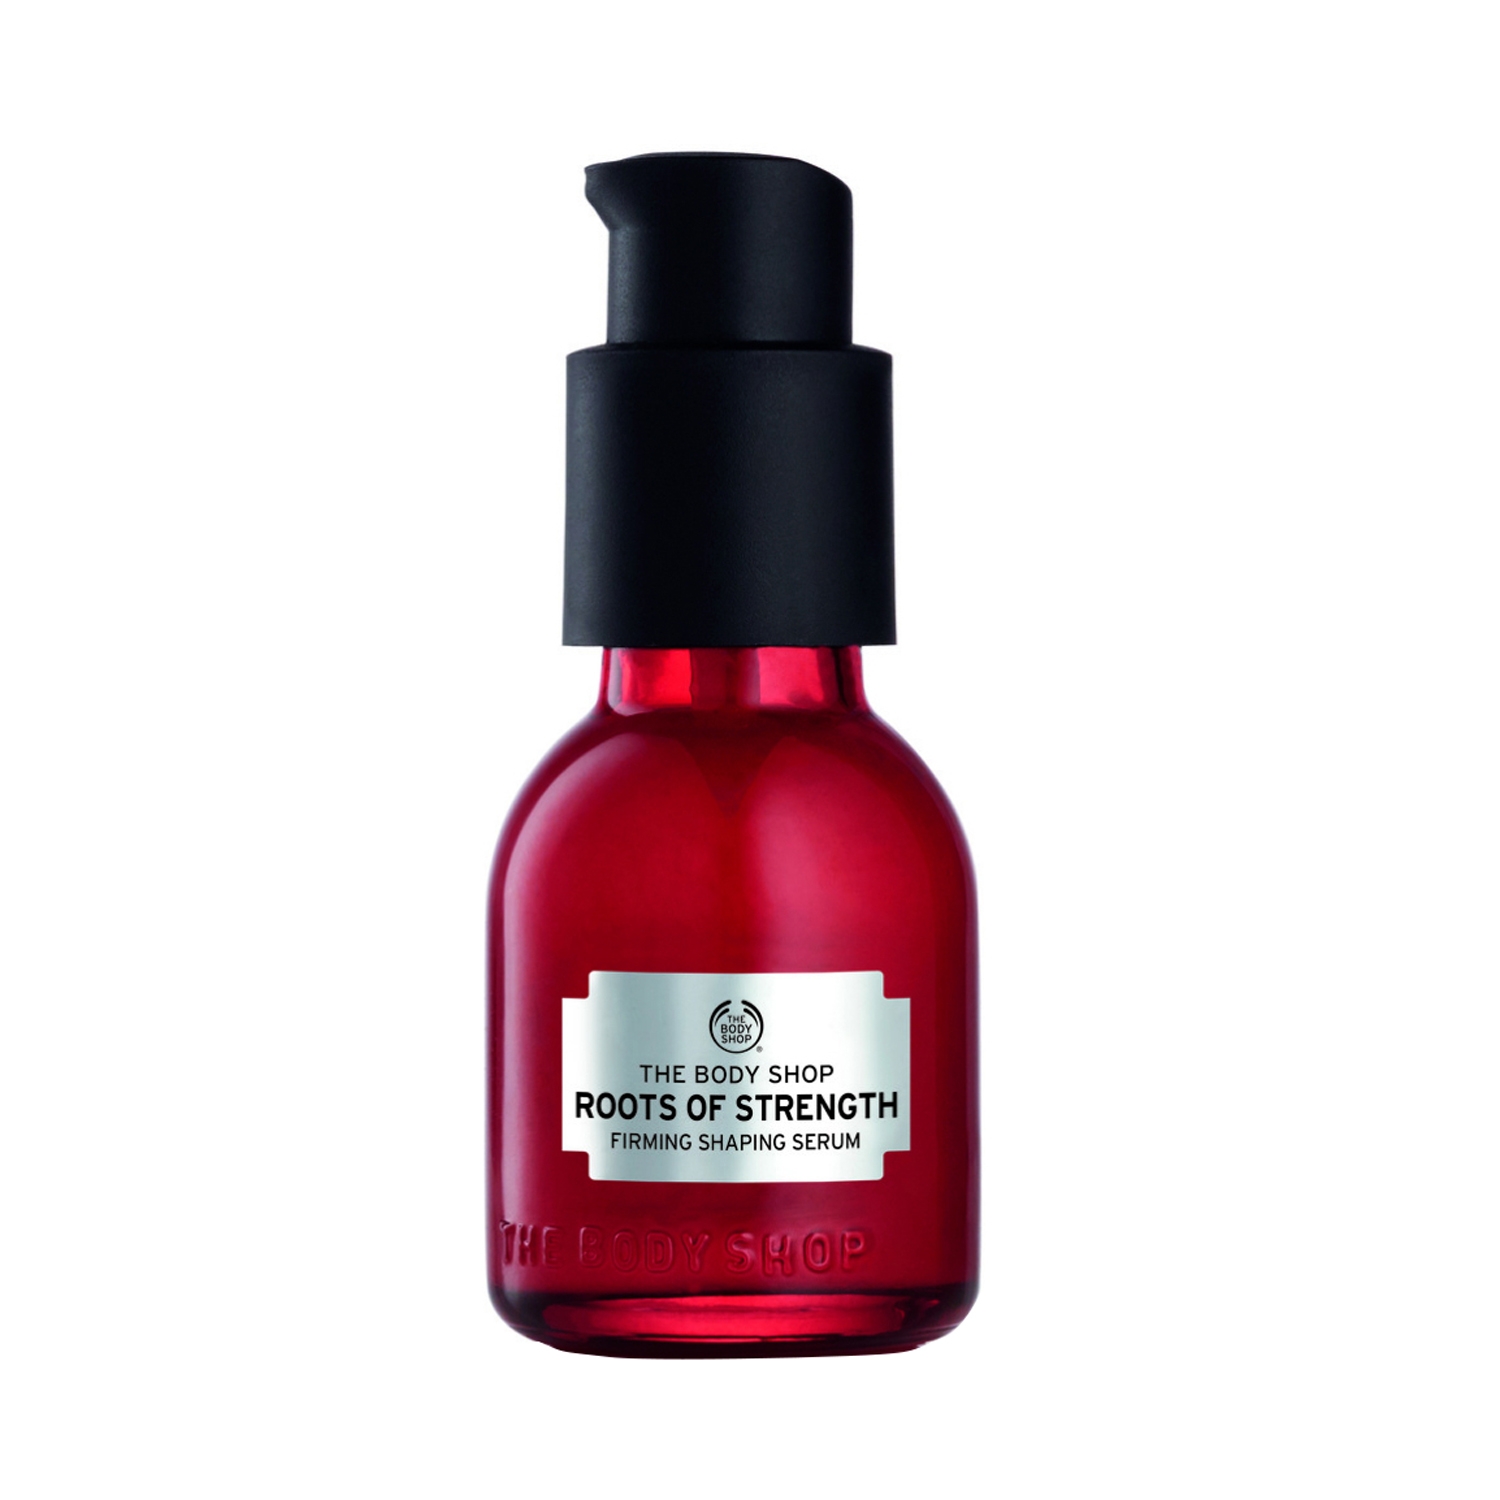 The Body Shop | The Body Shop Roots Of Strength Firming Shaping Serum (30ml)